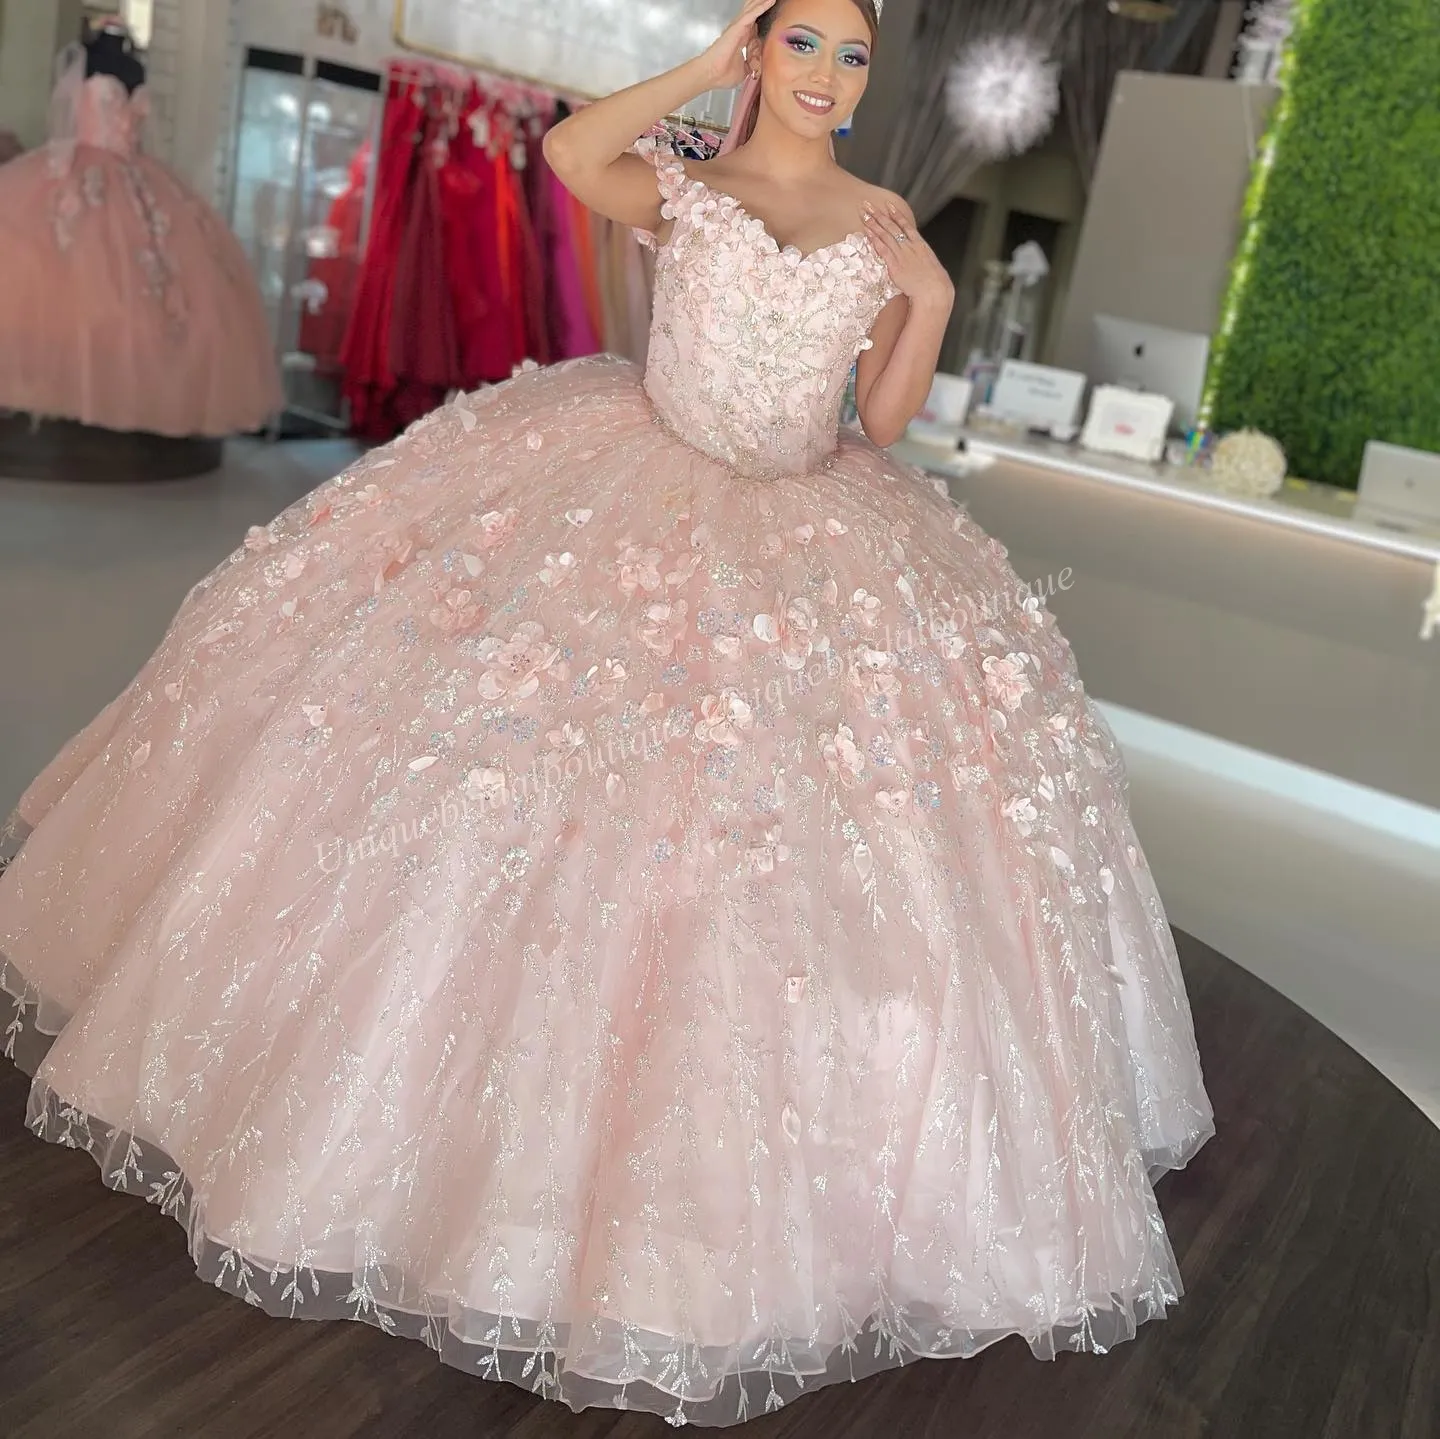 Charming Lilac Sweetheart Quinceanera Dress 2023 with Cape Off Shoulder Floor Length Ball Gown Appliques Vestidos De 15 Anos Red Pink Light Blue 3D Floral Quince NL